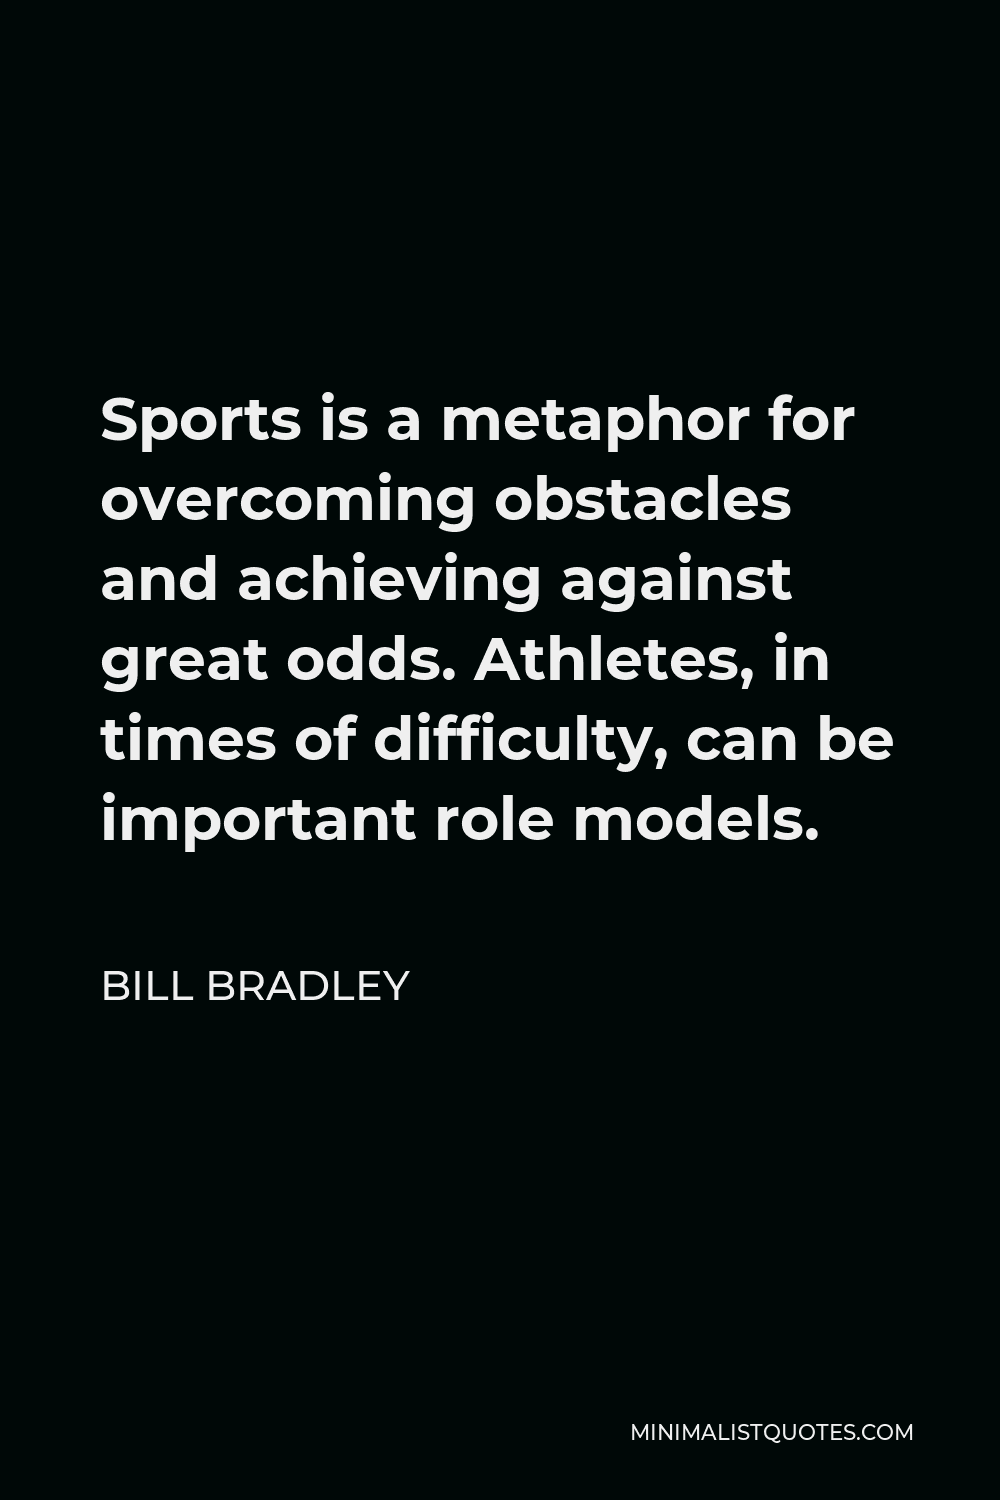 Bill Bradley Quote - Sports is a metaphor for overcoming obstacles and achieving against great odds. Athletes, in times of difficulty, can be important role models.